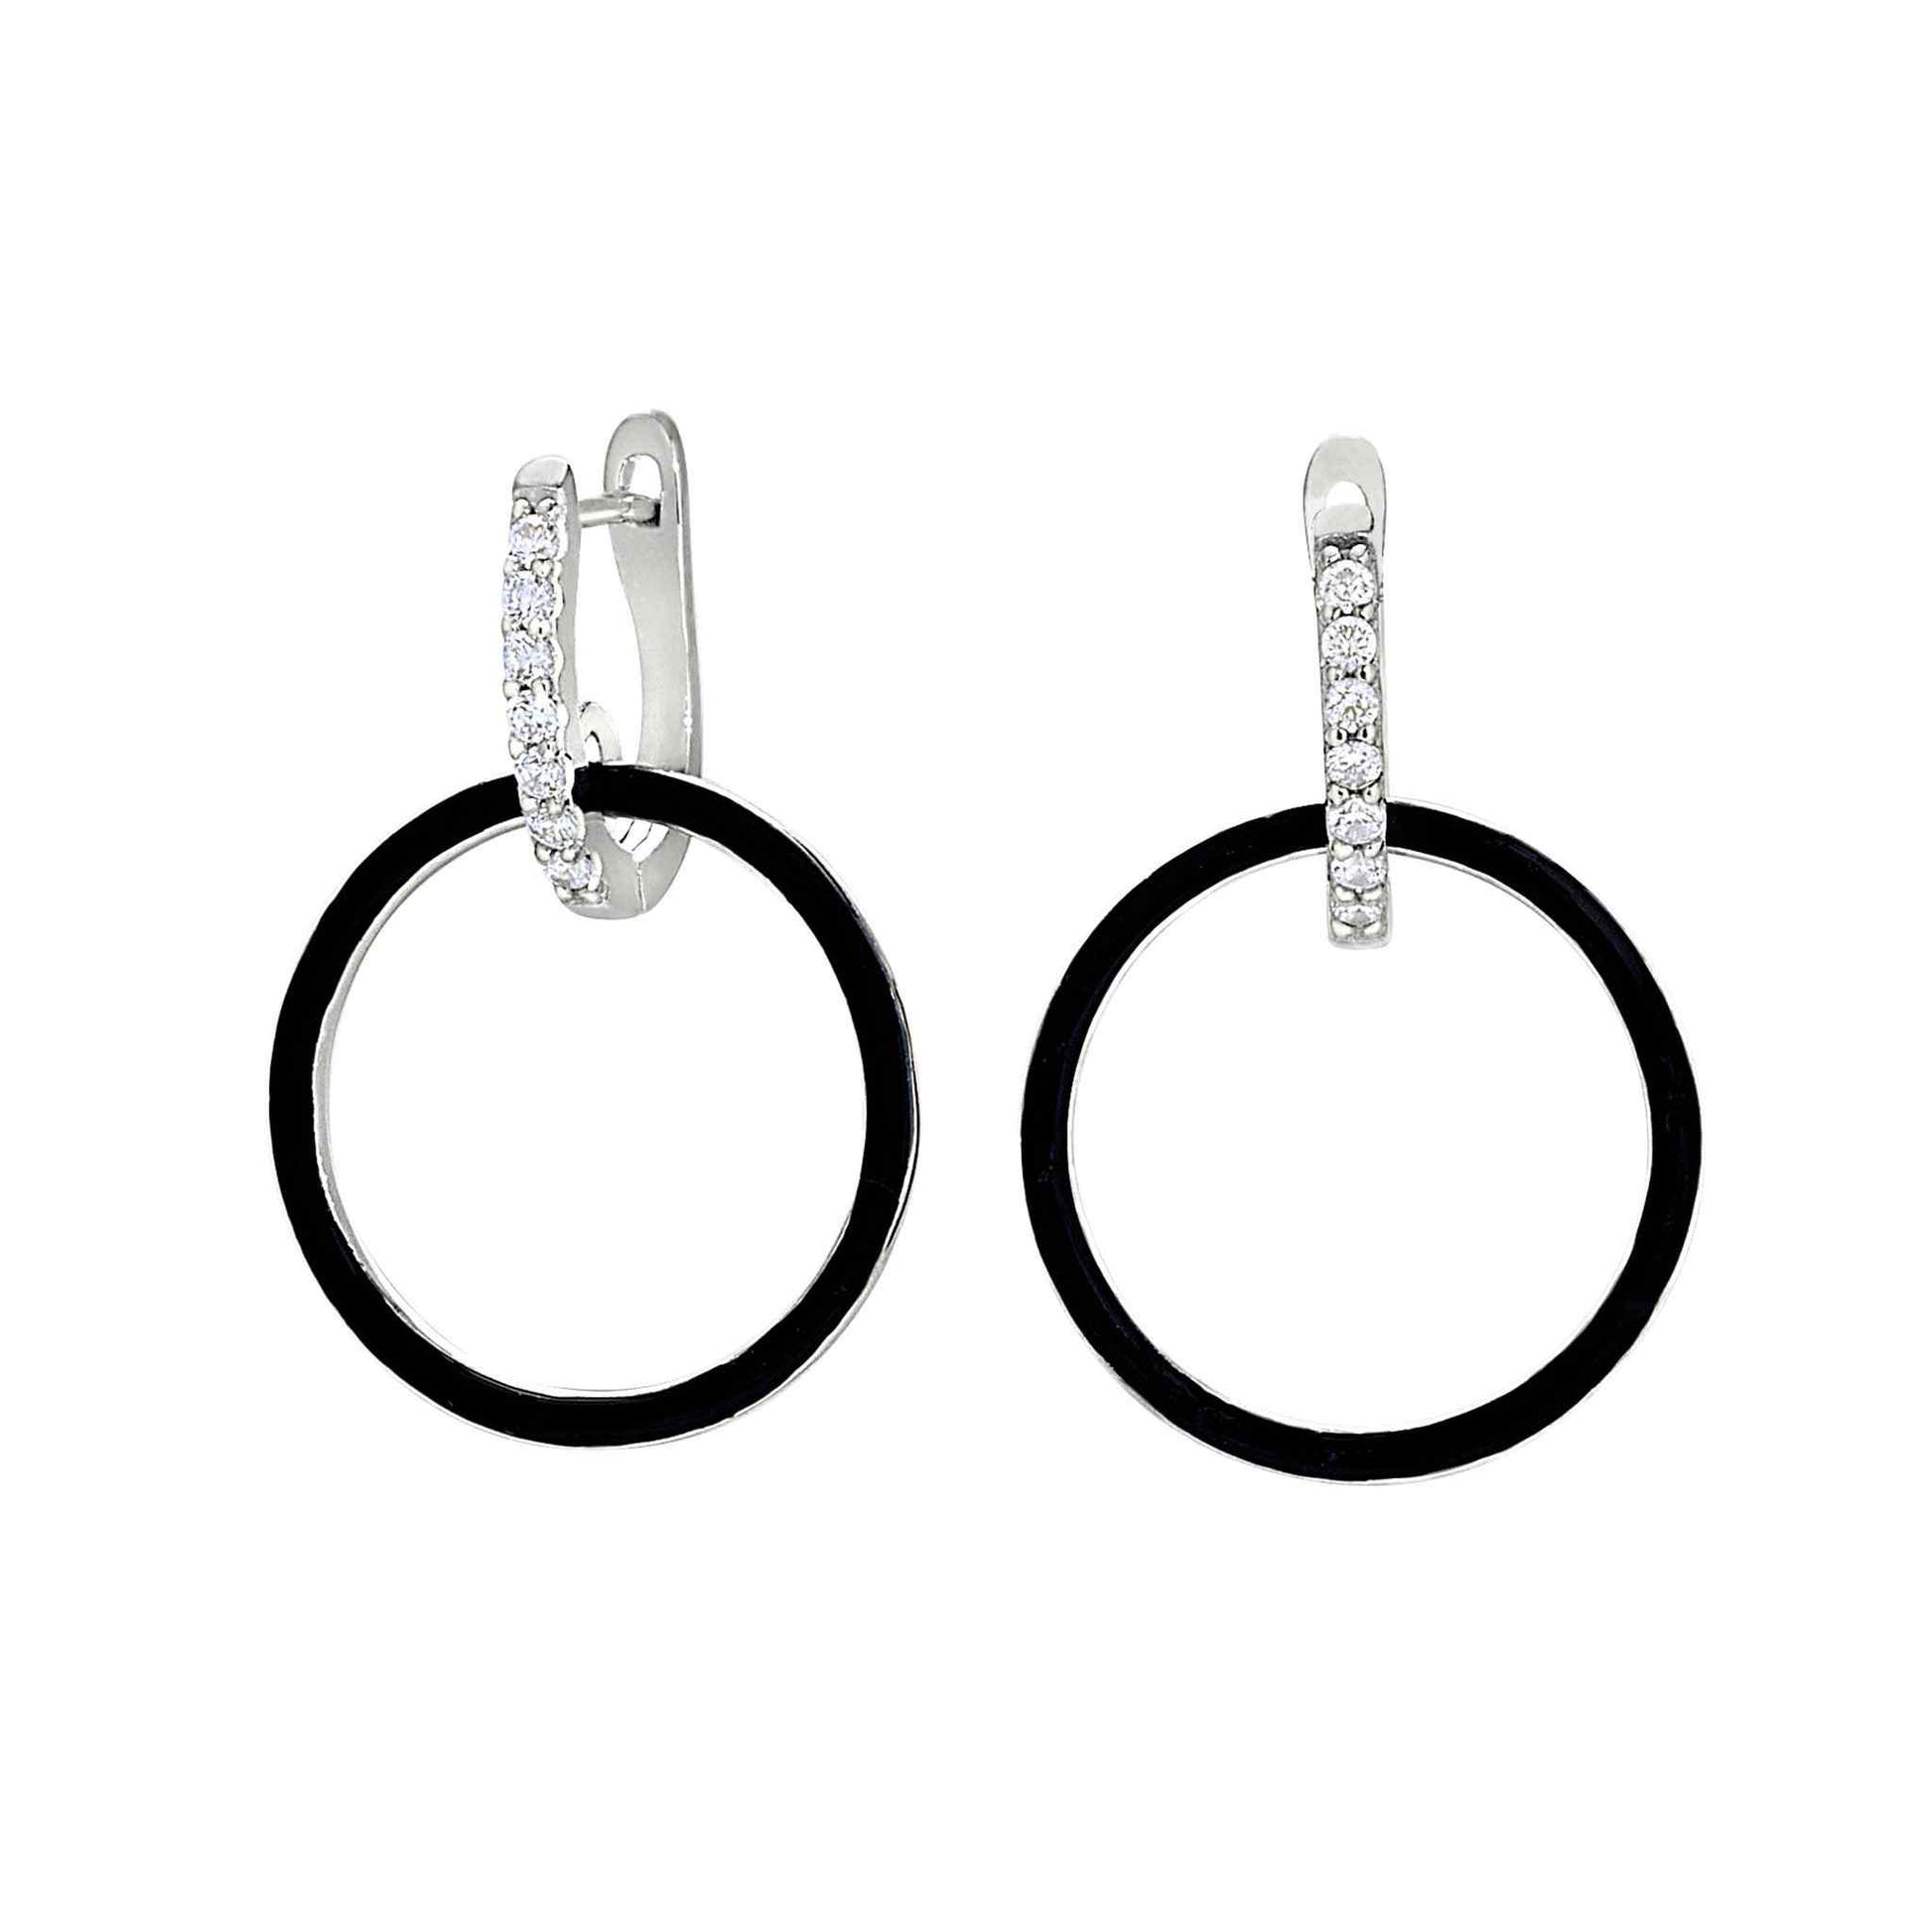 A black enamel open hoop earrings with simulated diamonds displayed on a neutral white background.